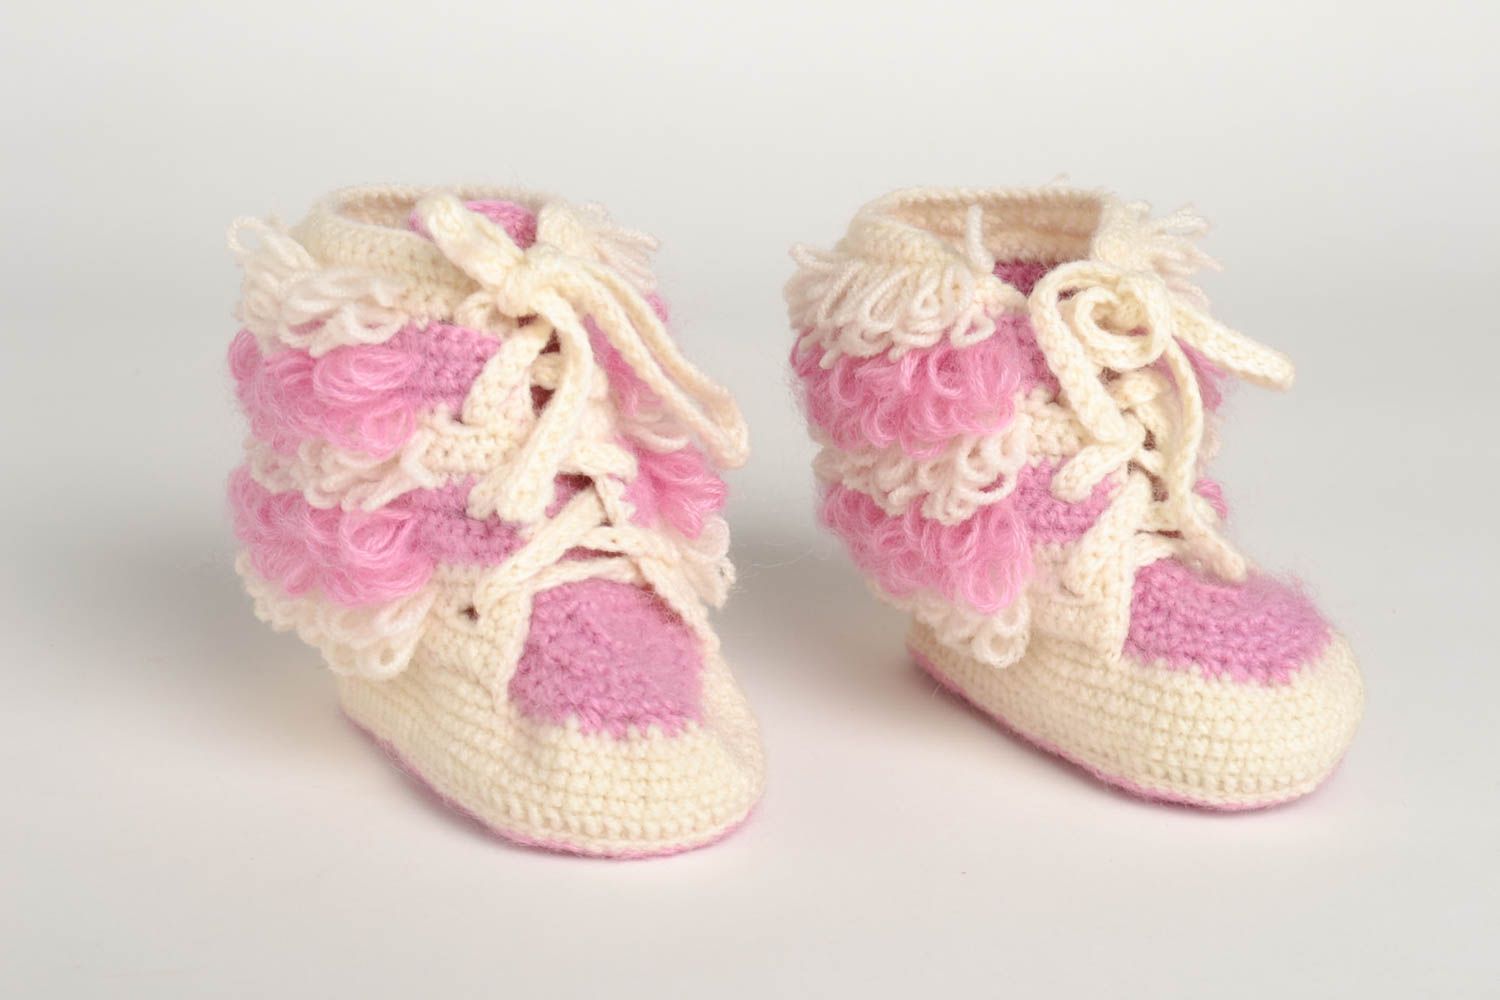 Handmade crochet baby booties baby bootees design fashion accessories for kids photo 5